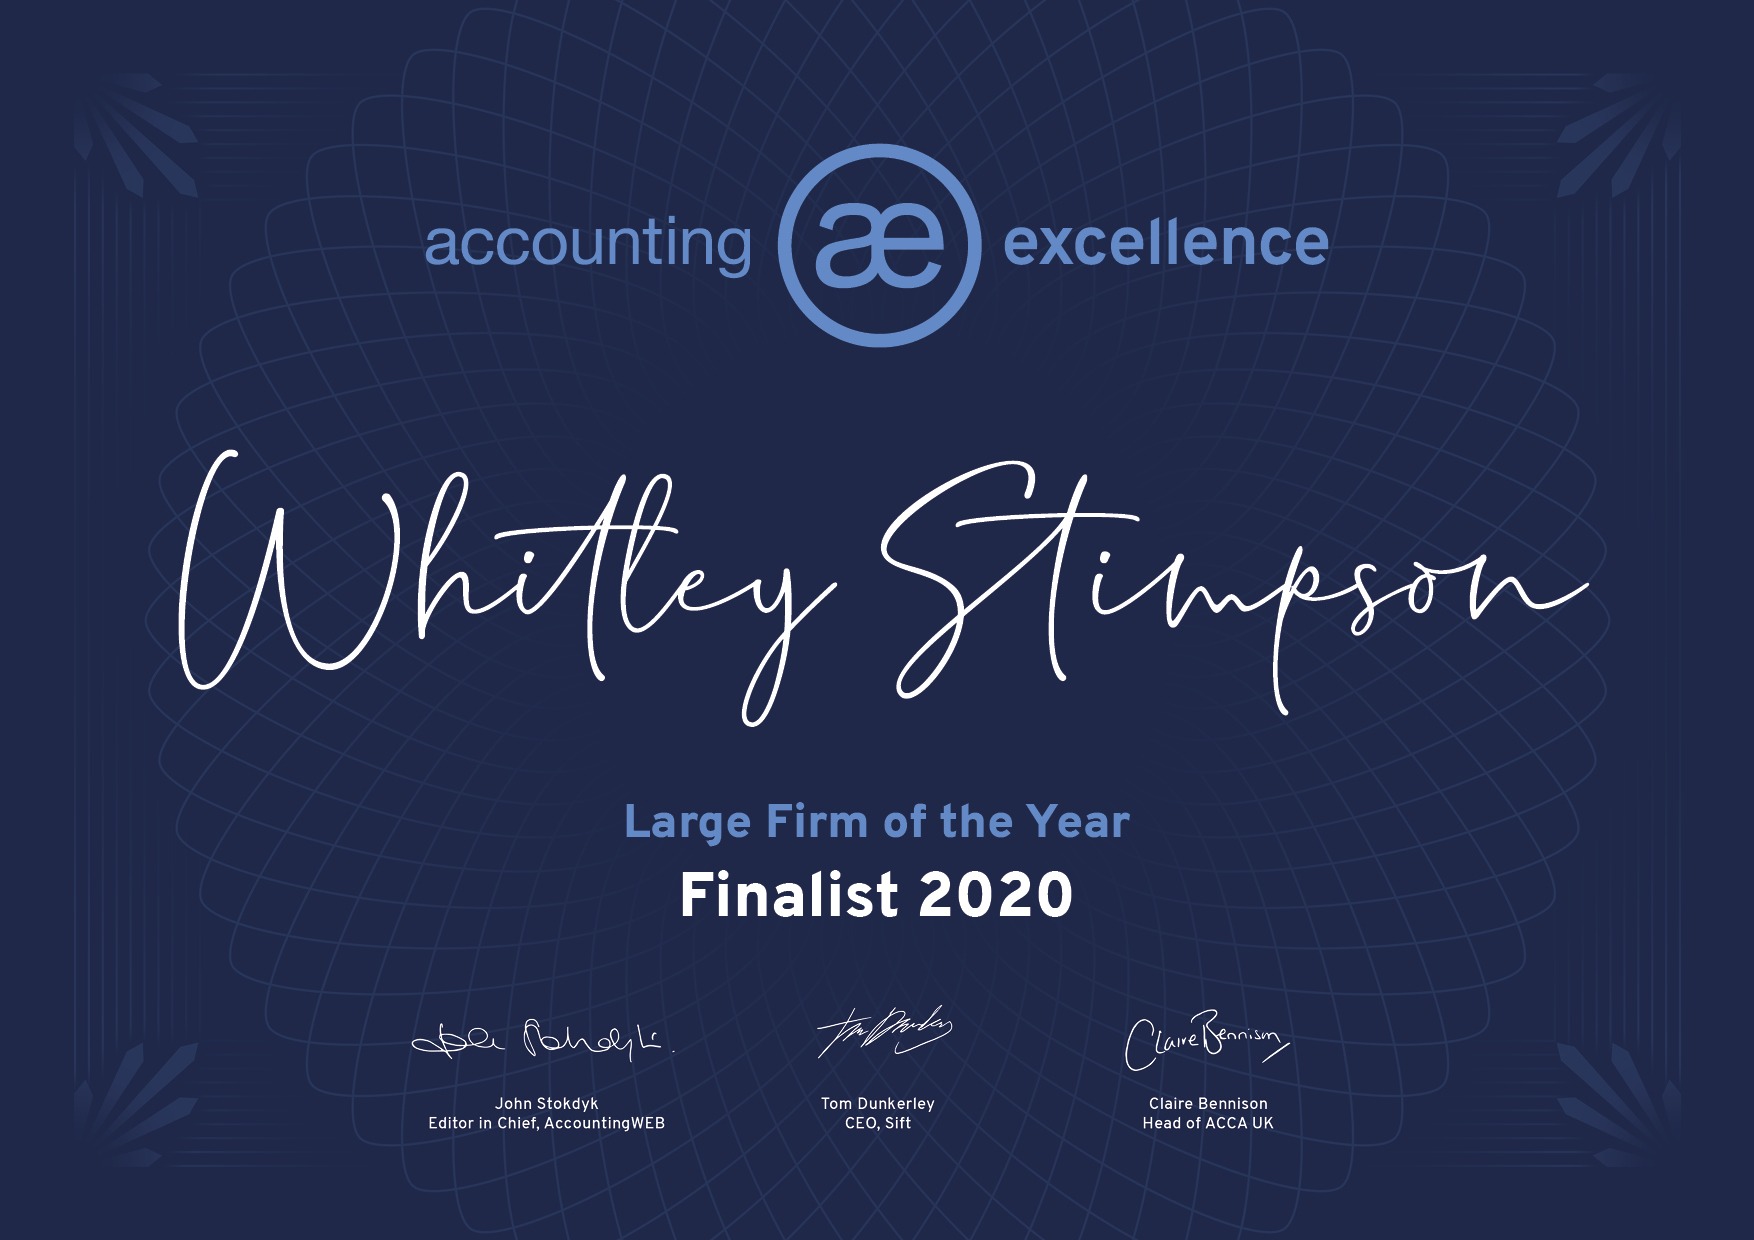 Whitley Stimpson announced as a finalist for Accounting Excellence award